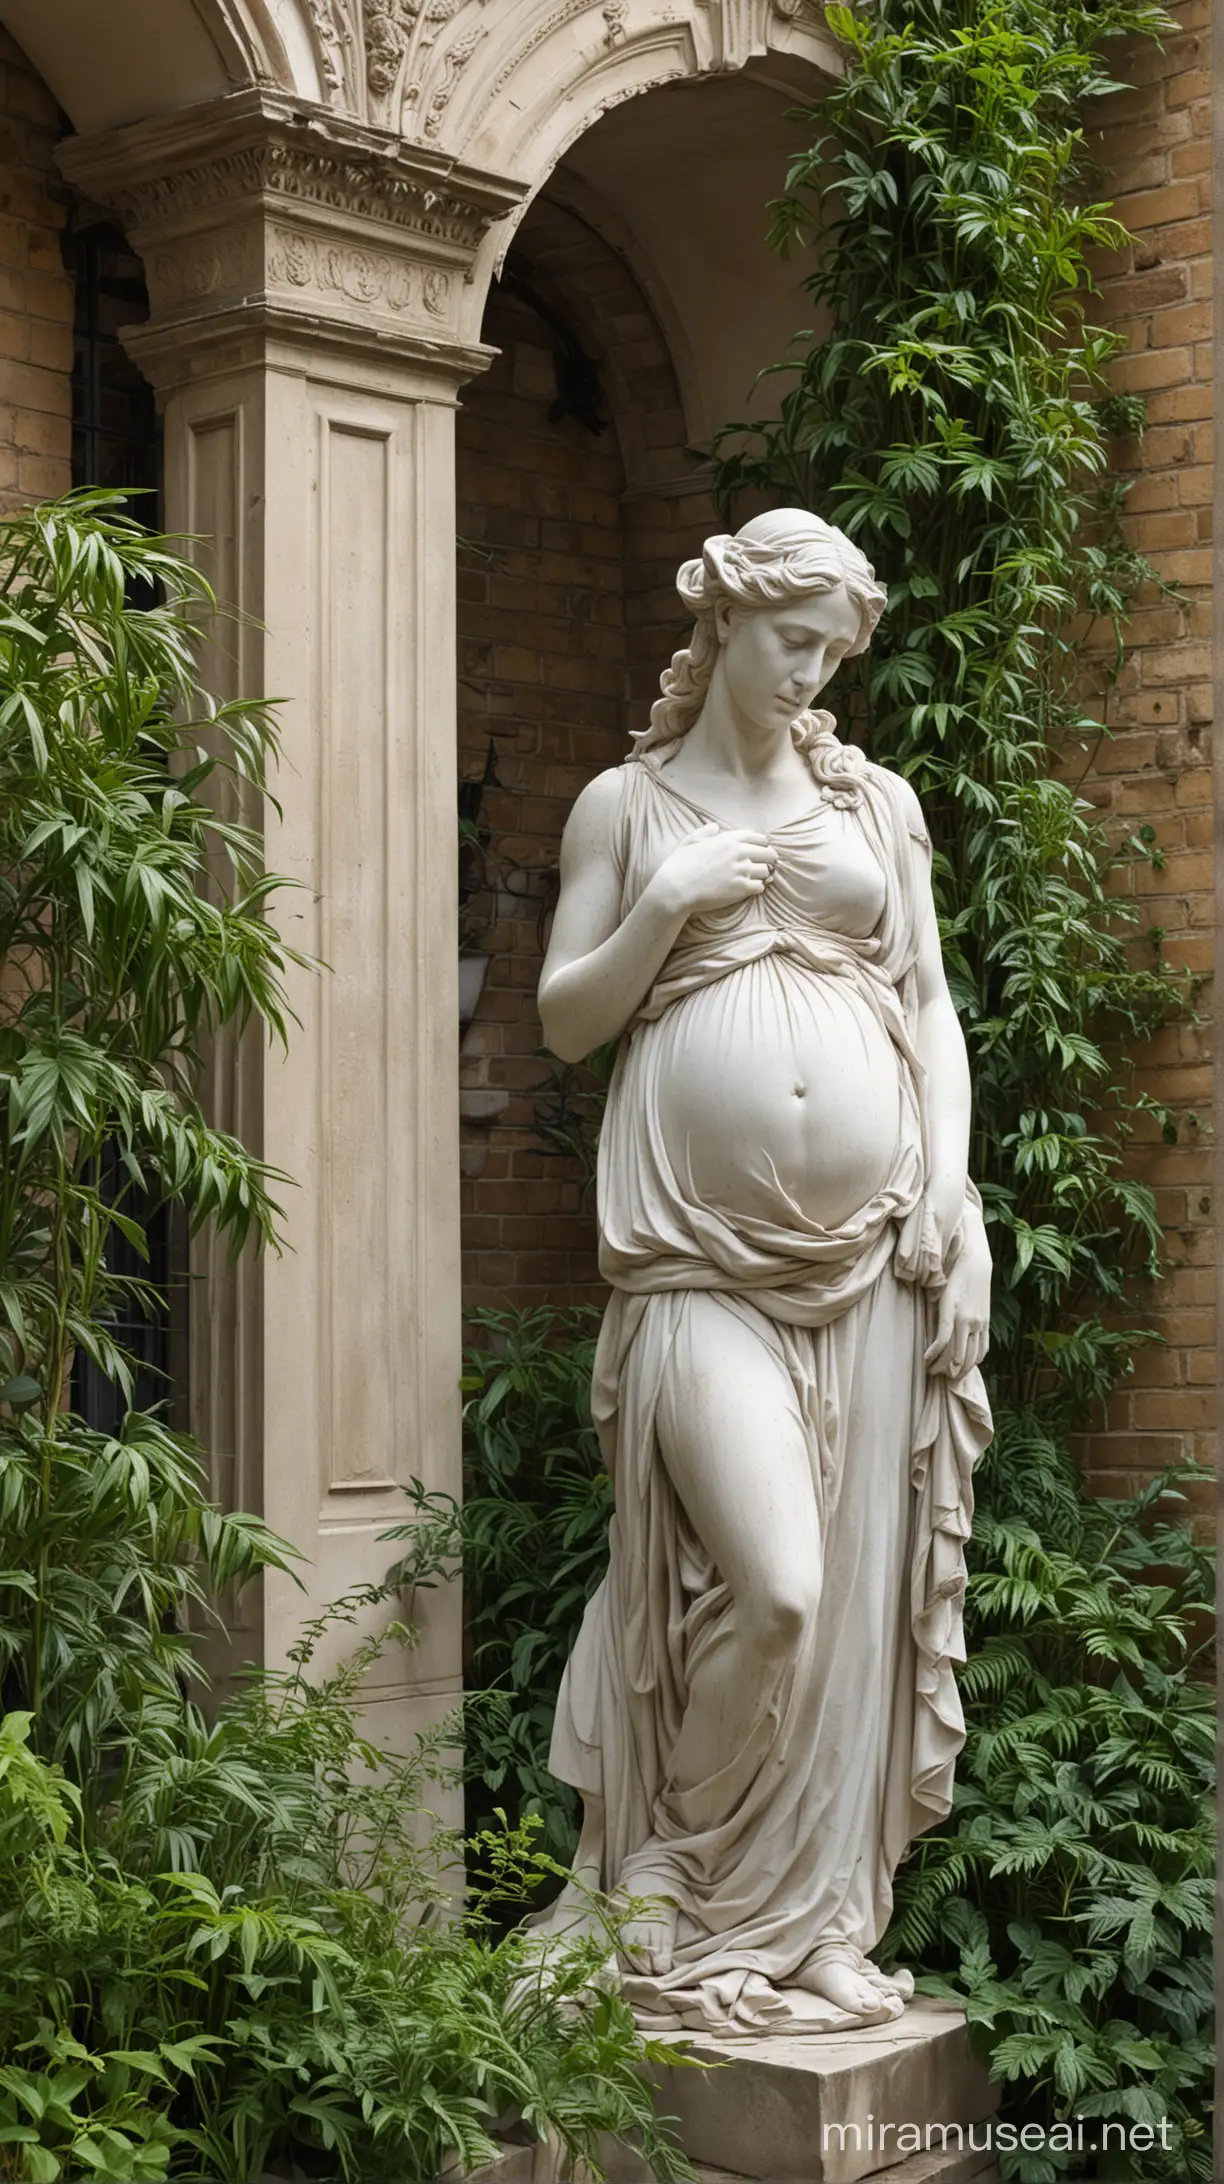 Classical sculpture of a sad pregnant woman. The sculpture is behind plants in a victorian architecture.